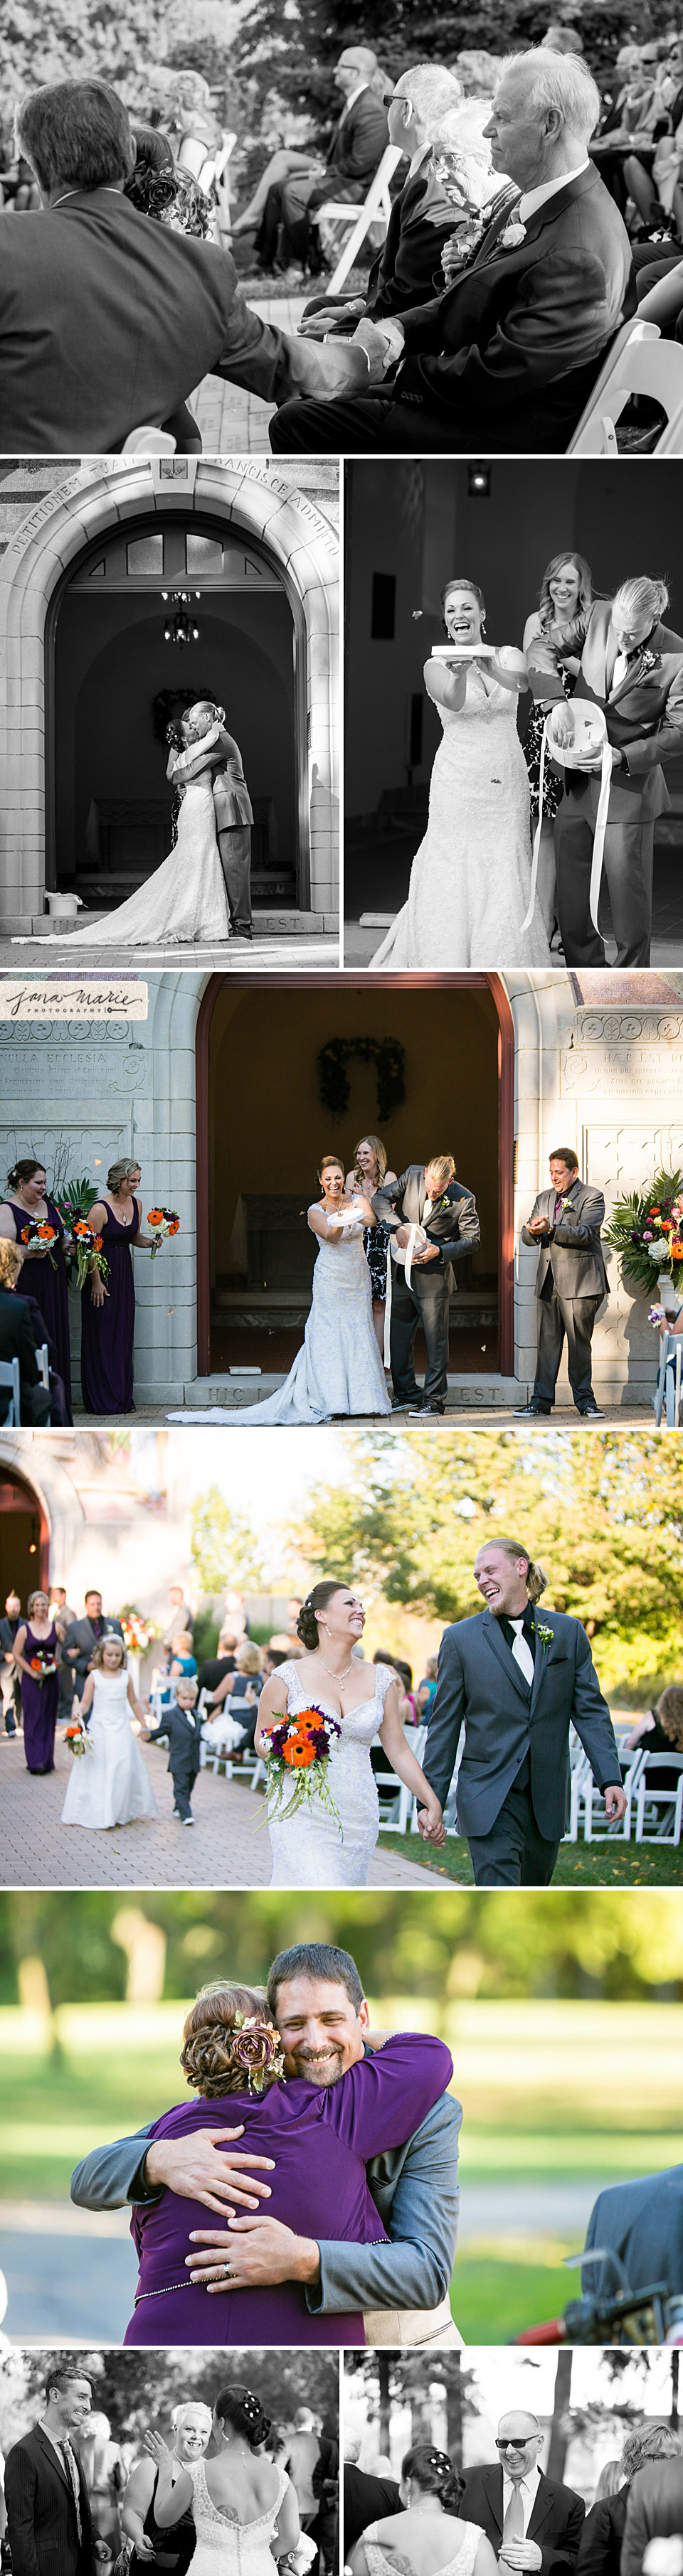 Butterfly release at wedding, Large bridal parties, Chicago couples, love, Jana Marie Photos